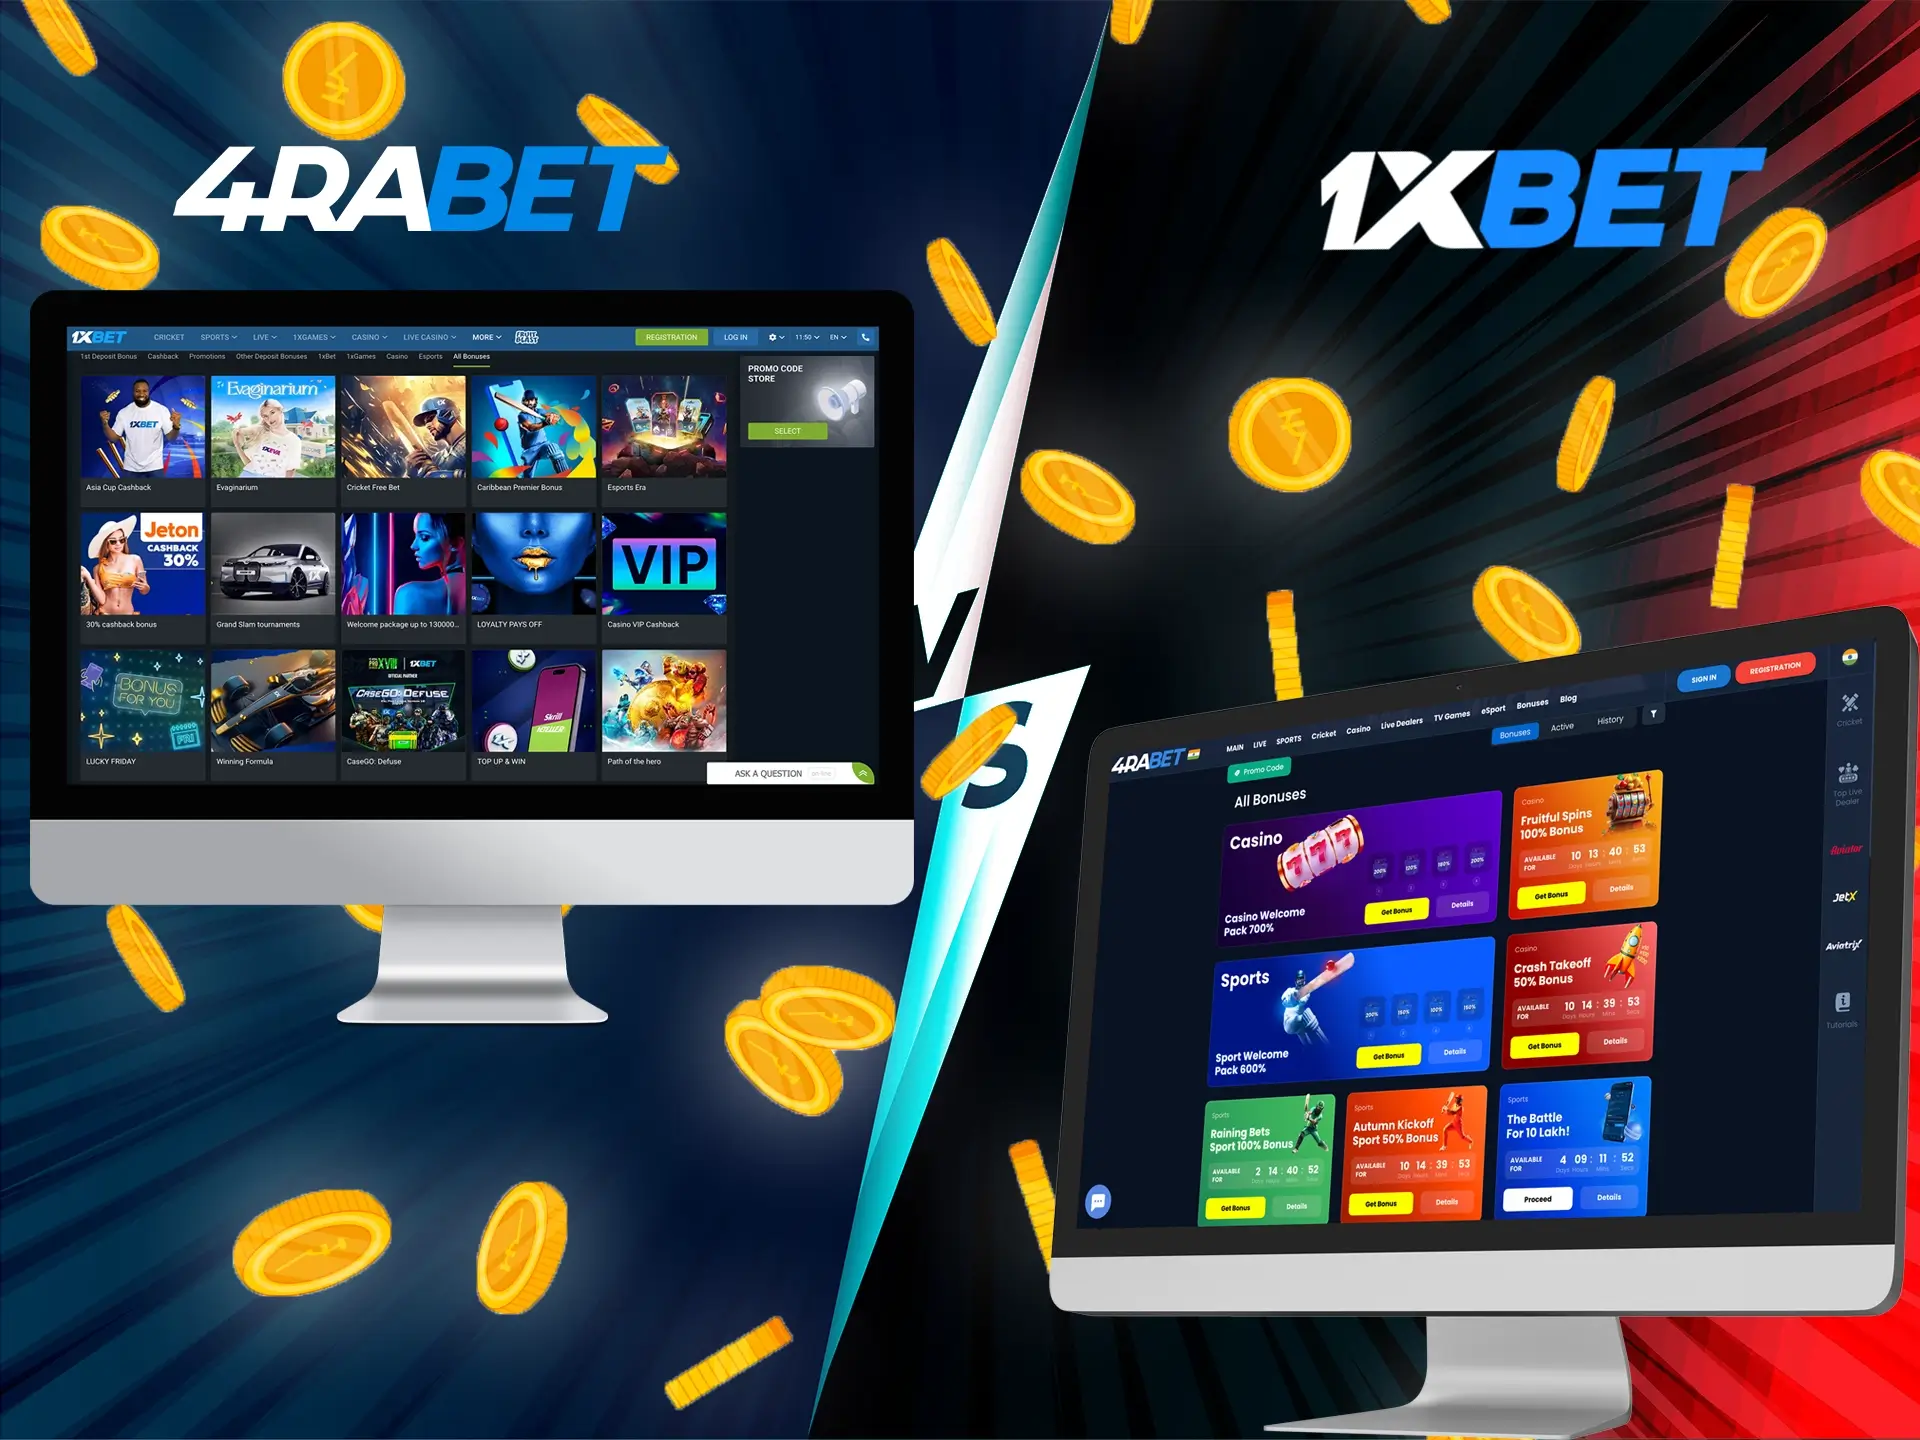 1xbet and 4rabet like to delight their users with excellent bonuses.